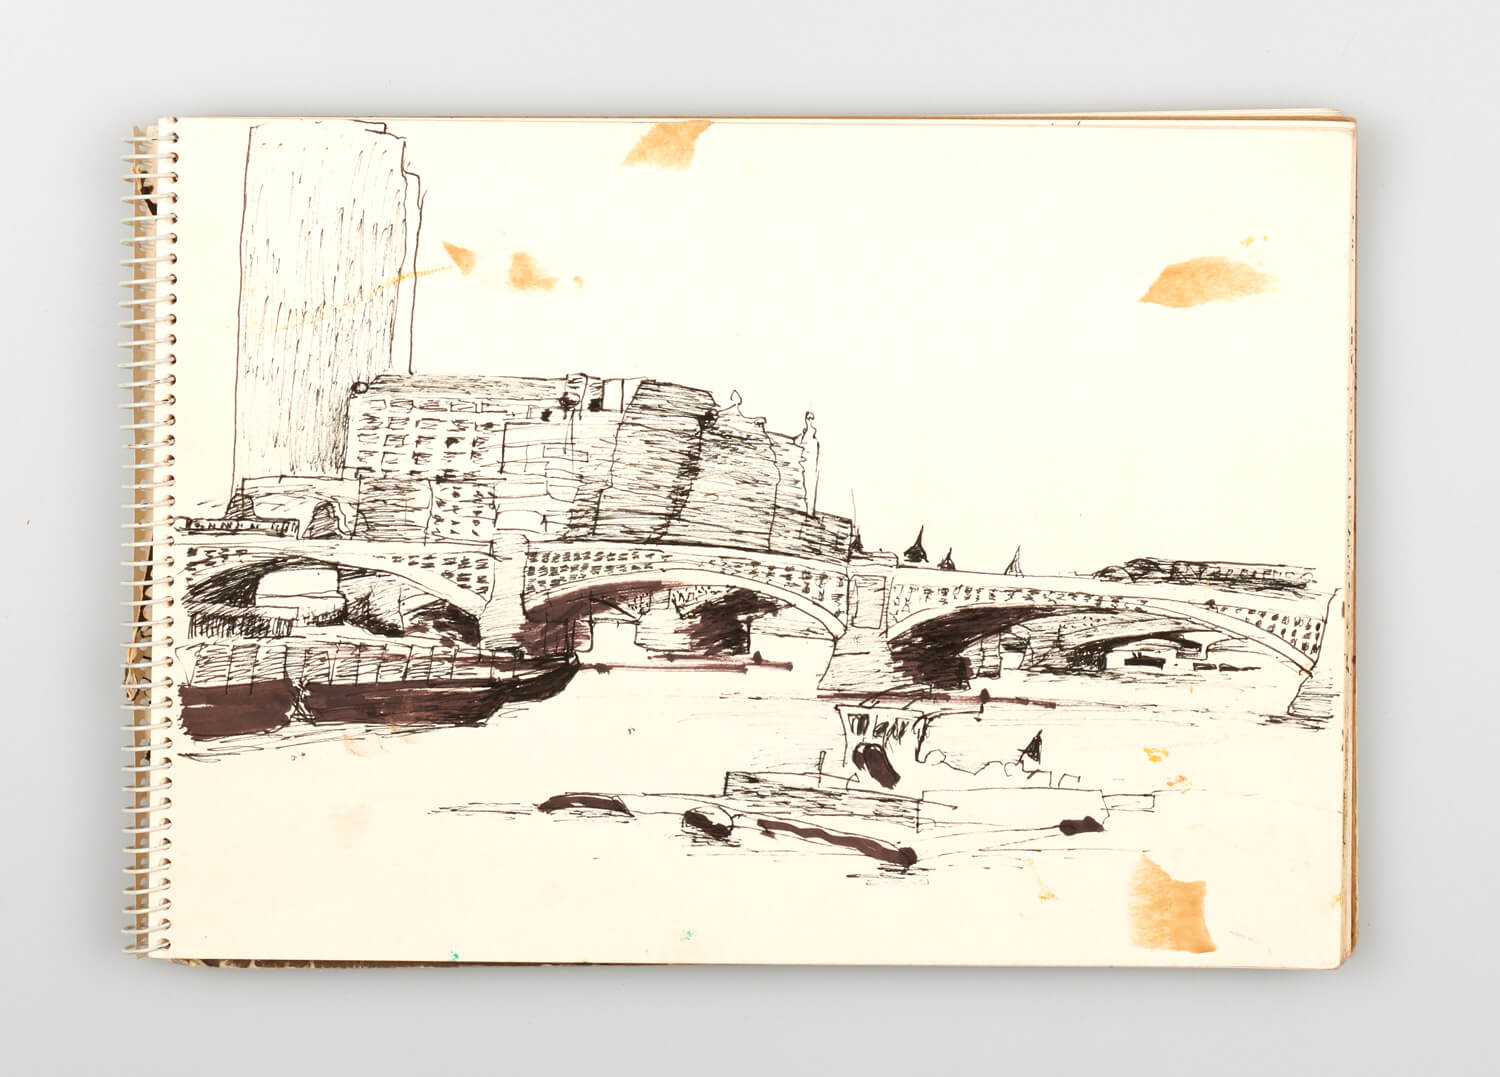 JB218 - Sketch for Bridges on the River Thames - 1992 - 21 x 30 cm - Pen and Ink on cartridge paper